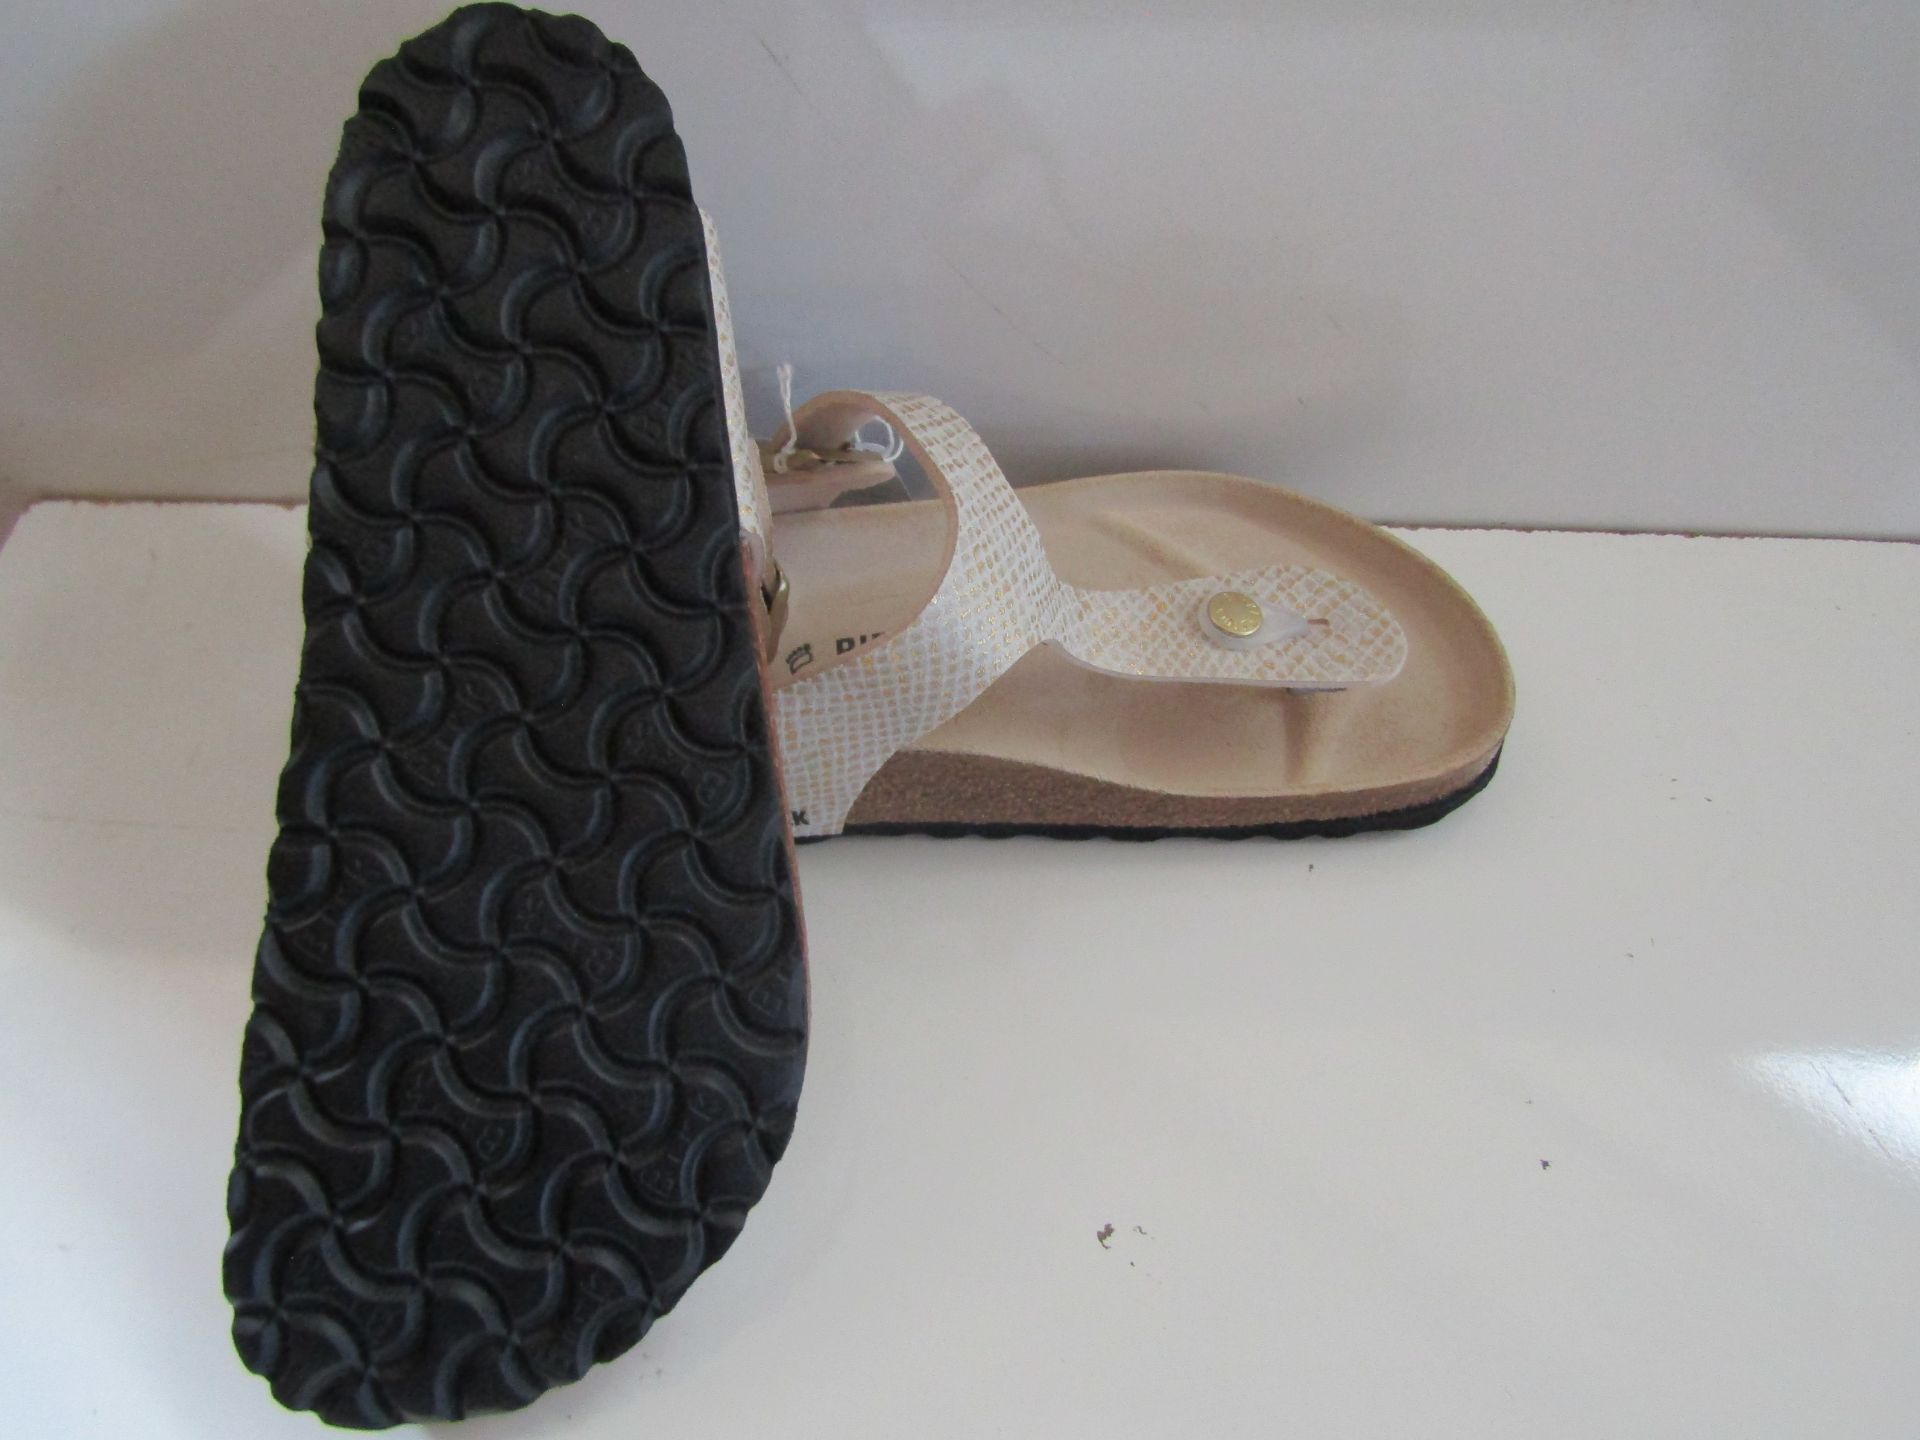 Birkenstock Thonged Sandal Size 39 New With Tags - Image 2 of 3